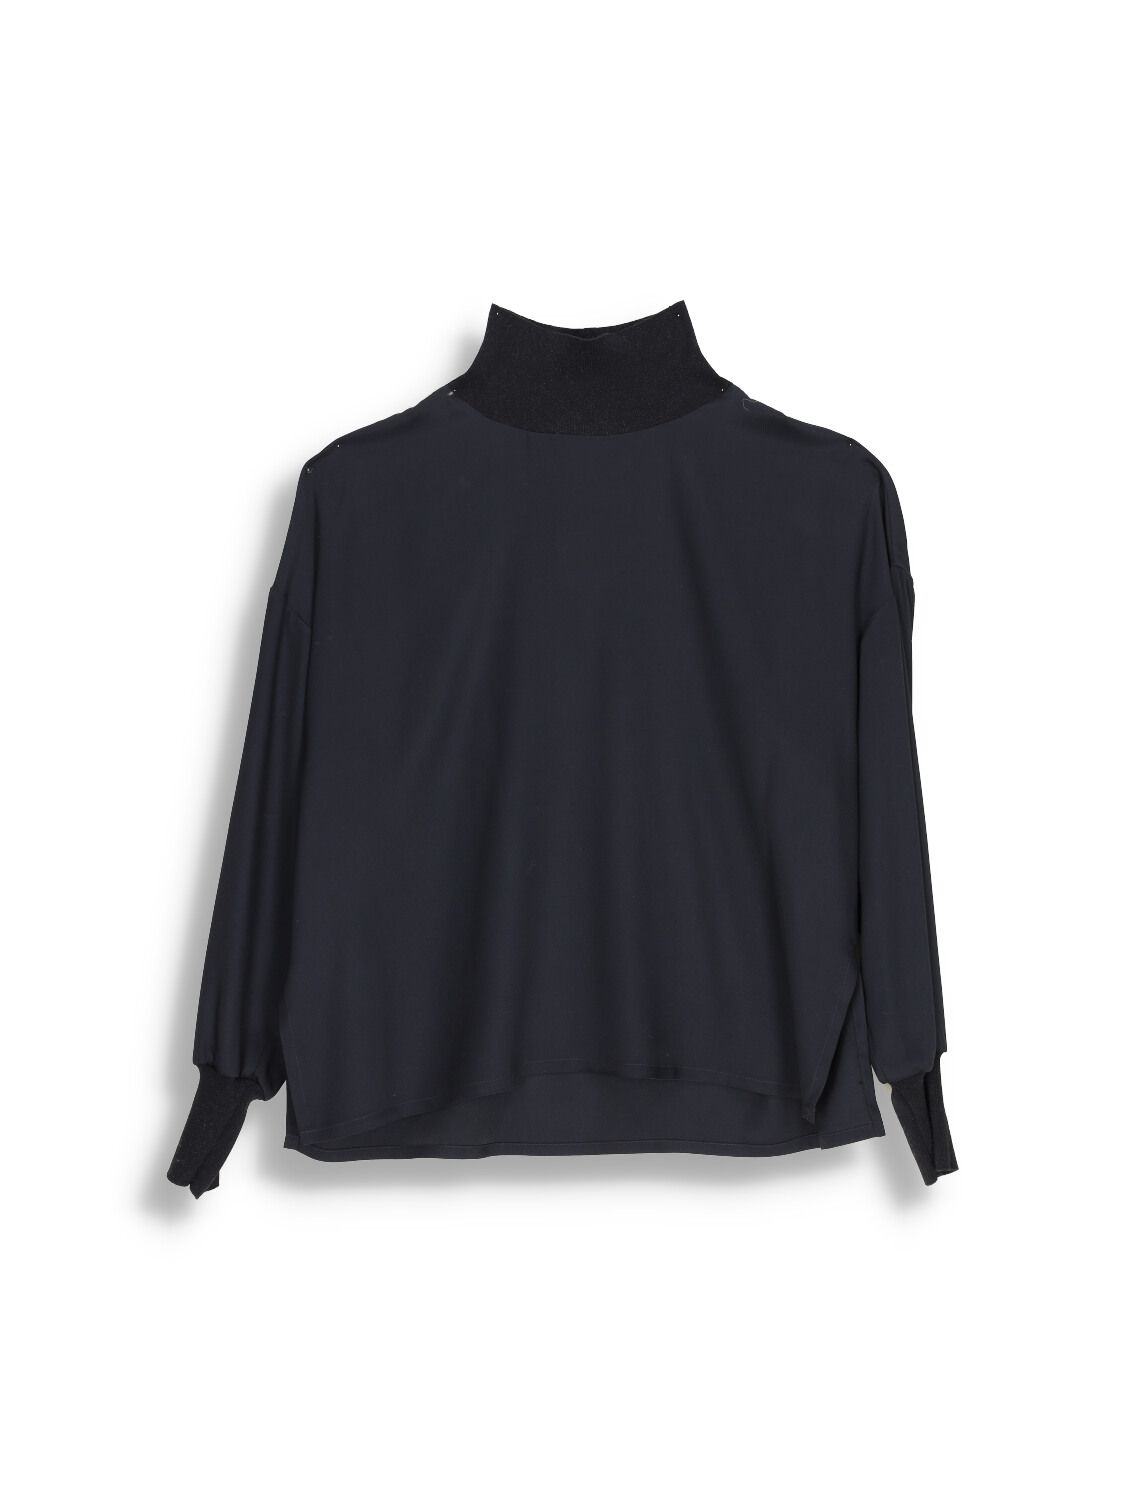 Turtleneck sweater with glitter collar and silk portion